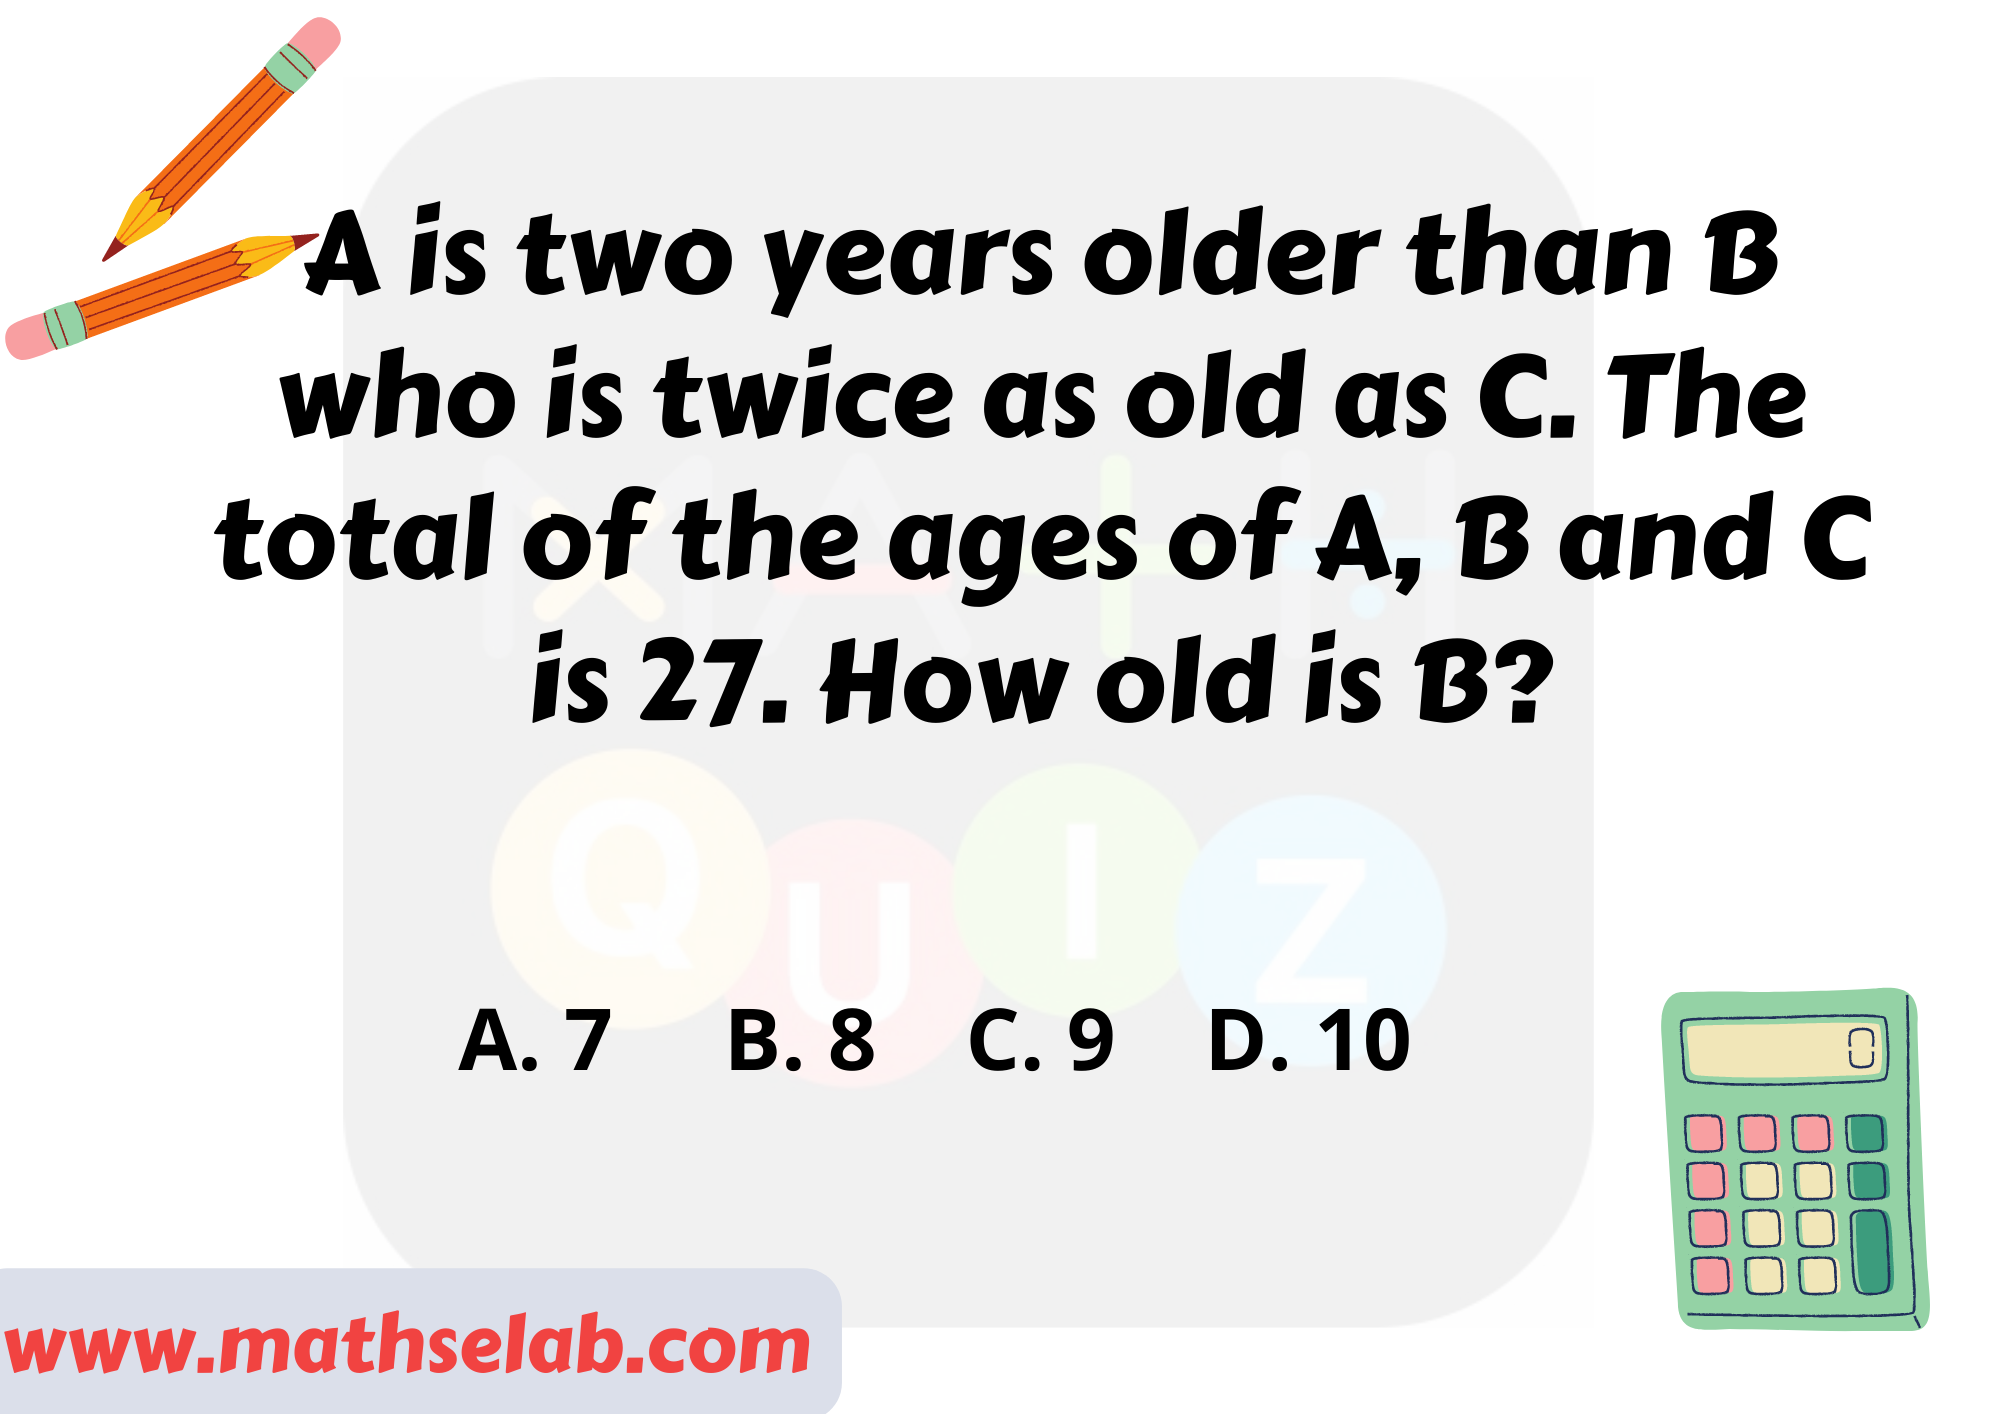 A is two years older than B who is twice as old as C. The total of the ages of A, B and C is 27. How old is B - www.mathselab.com